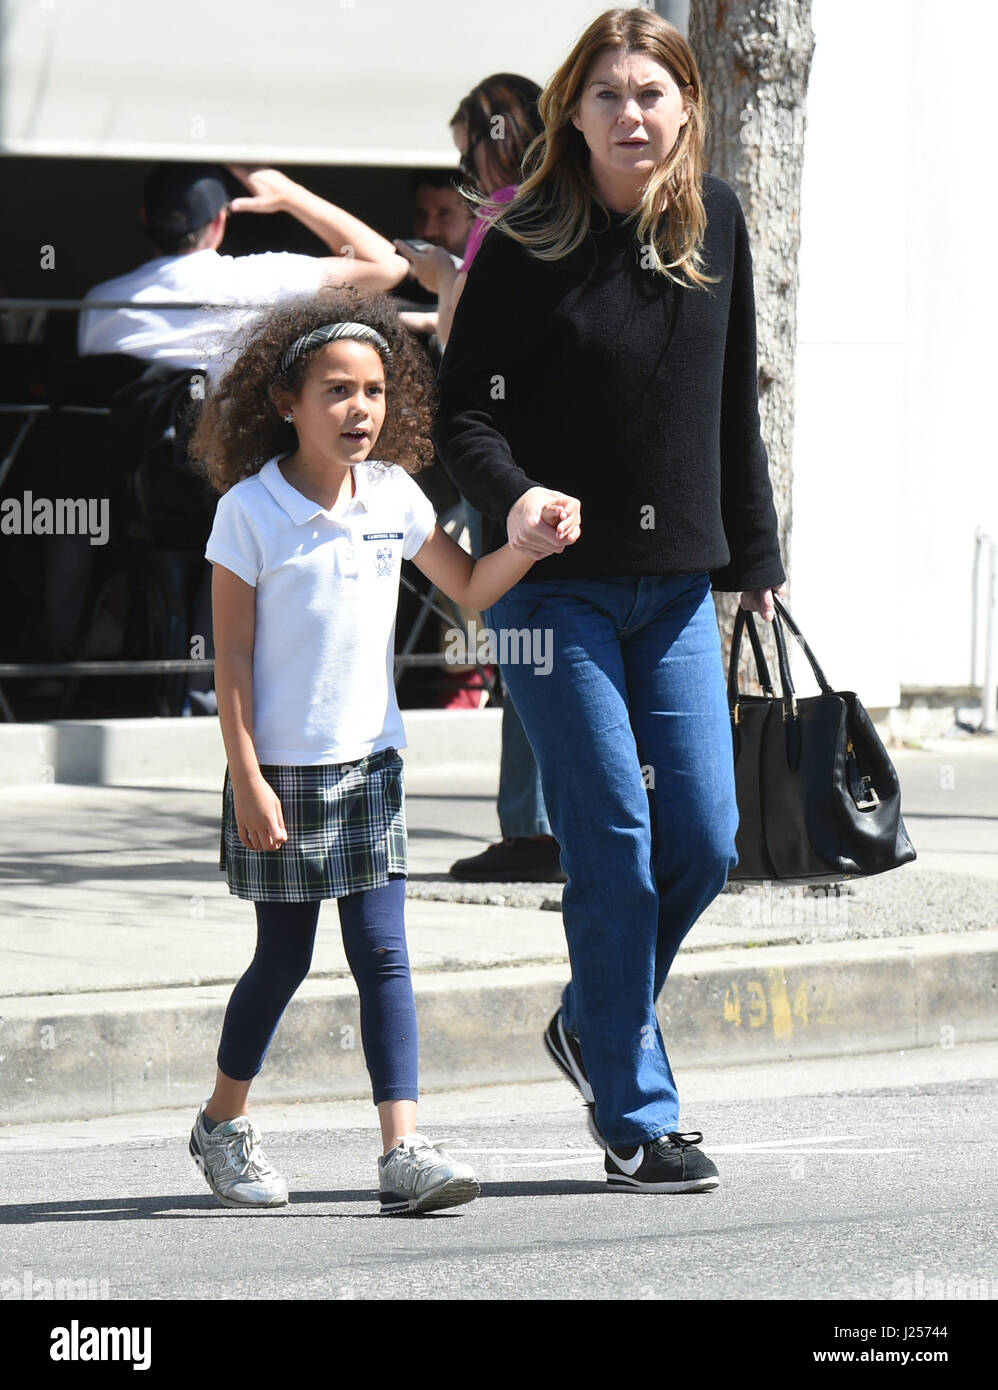 Ellen Pompeo grabs lunch with her daughter Stella Luna Pompeo Ivery  Featuring: Ellen Pompeo, Stella Luna Pompeo Ivery Where: Los Angeles,  California, United States When: 24 Mar 2017 Stock Photo - Alamy